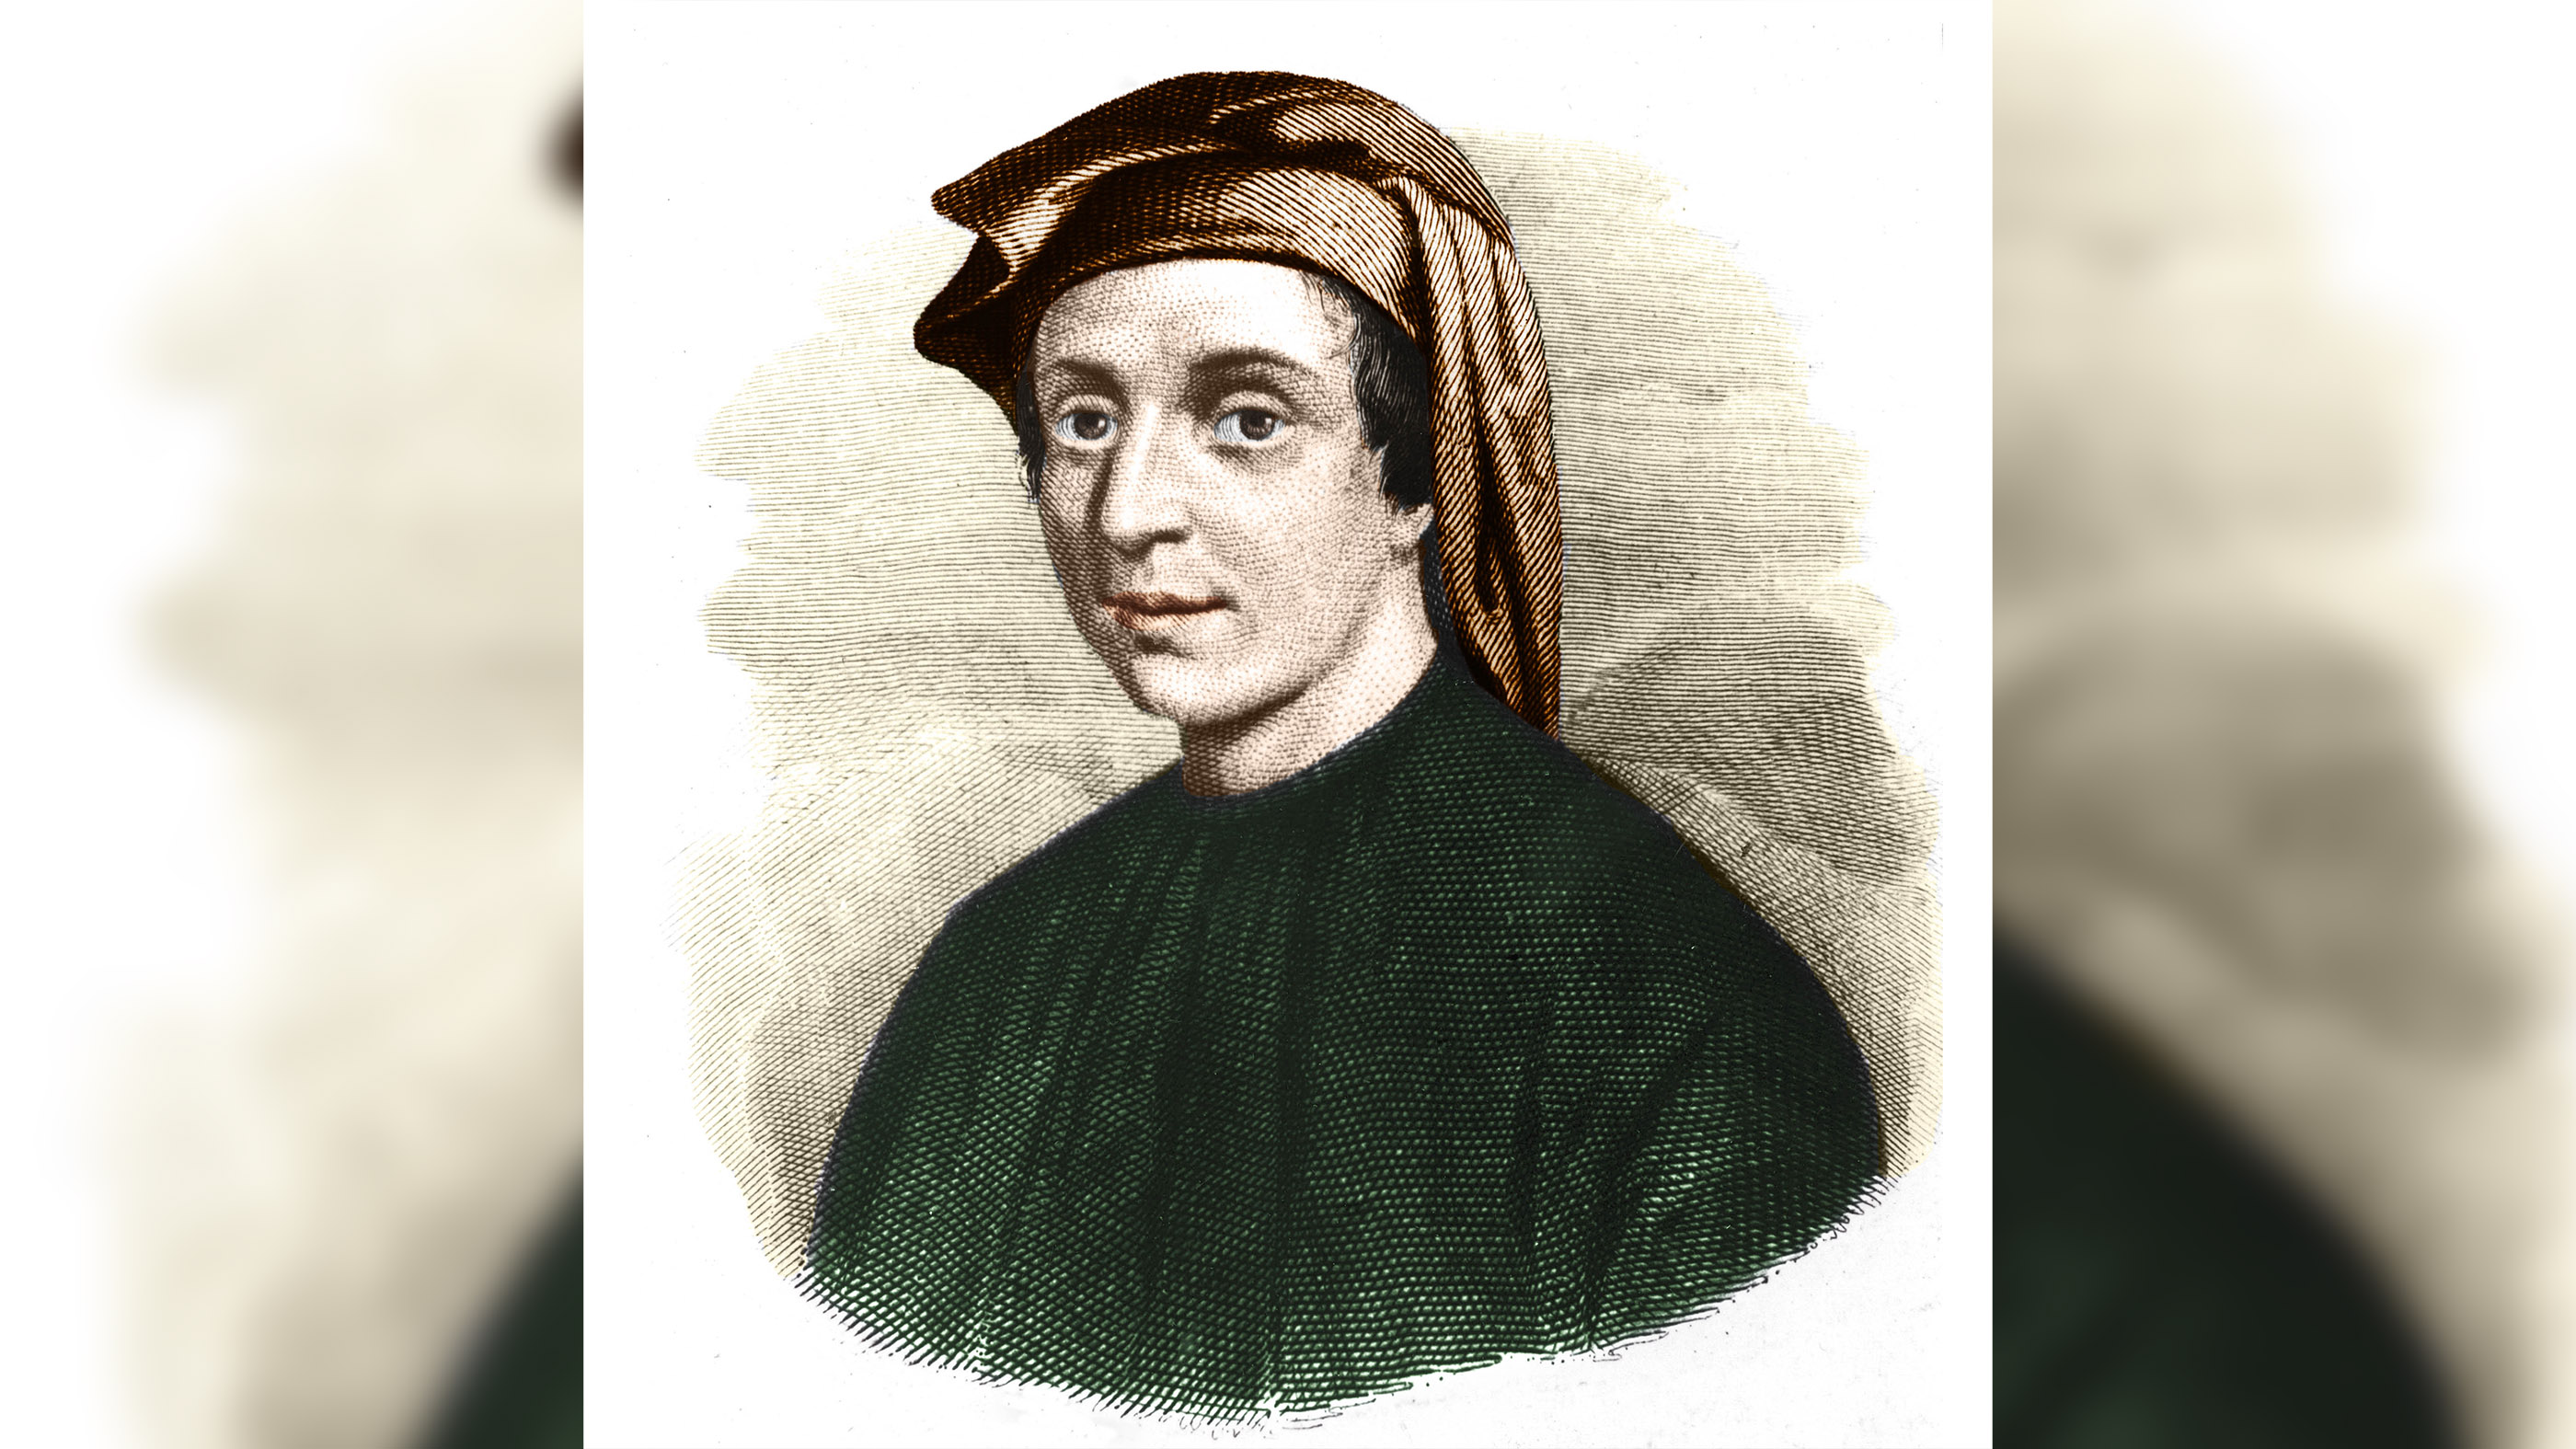 Portrait of Leonardo Fibonacci, who was thought to have discovered the famous Fibonacci sequence. However, in 1202 in a massive tome, he introduces the sequence with a problem involving rabbits.